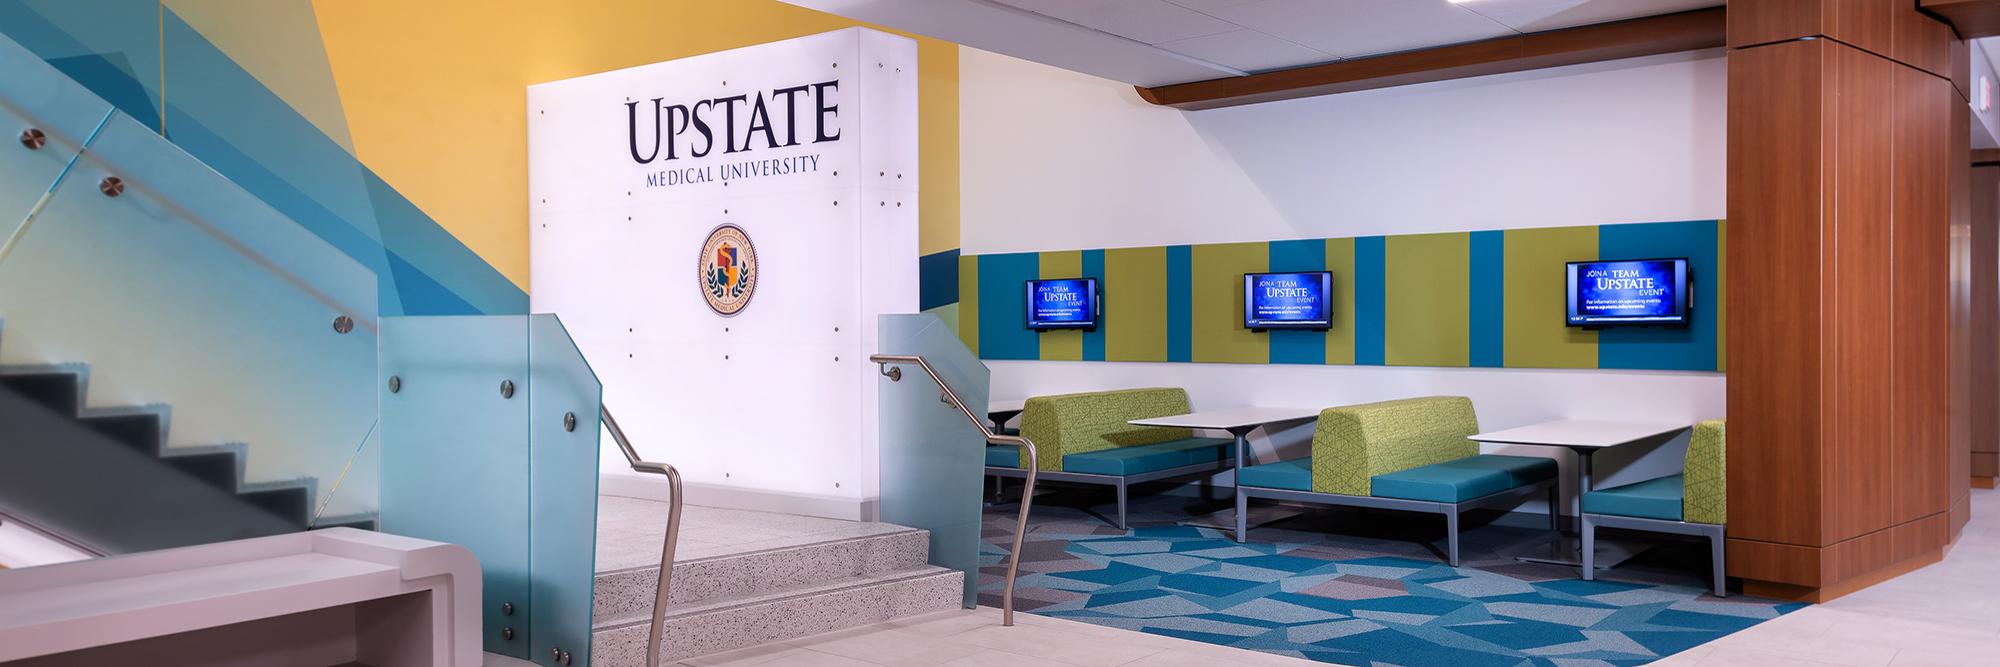 Lobby of the new Upstate Simulation Center